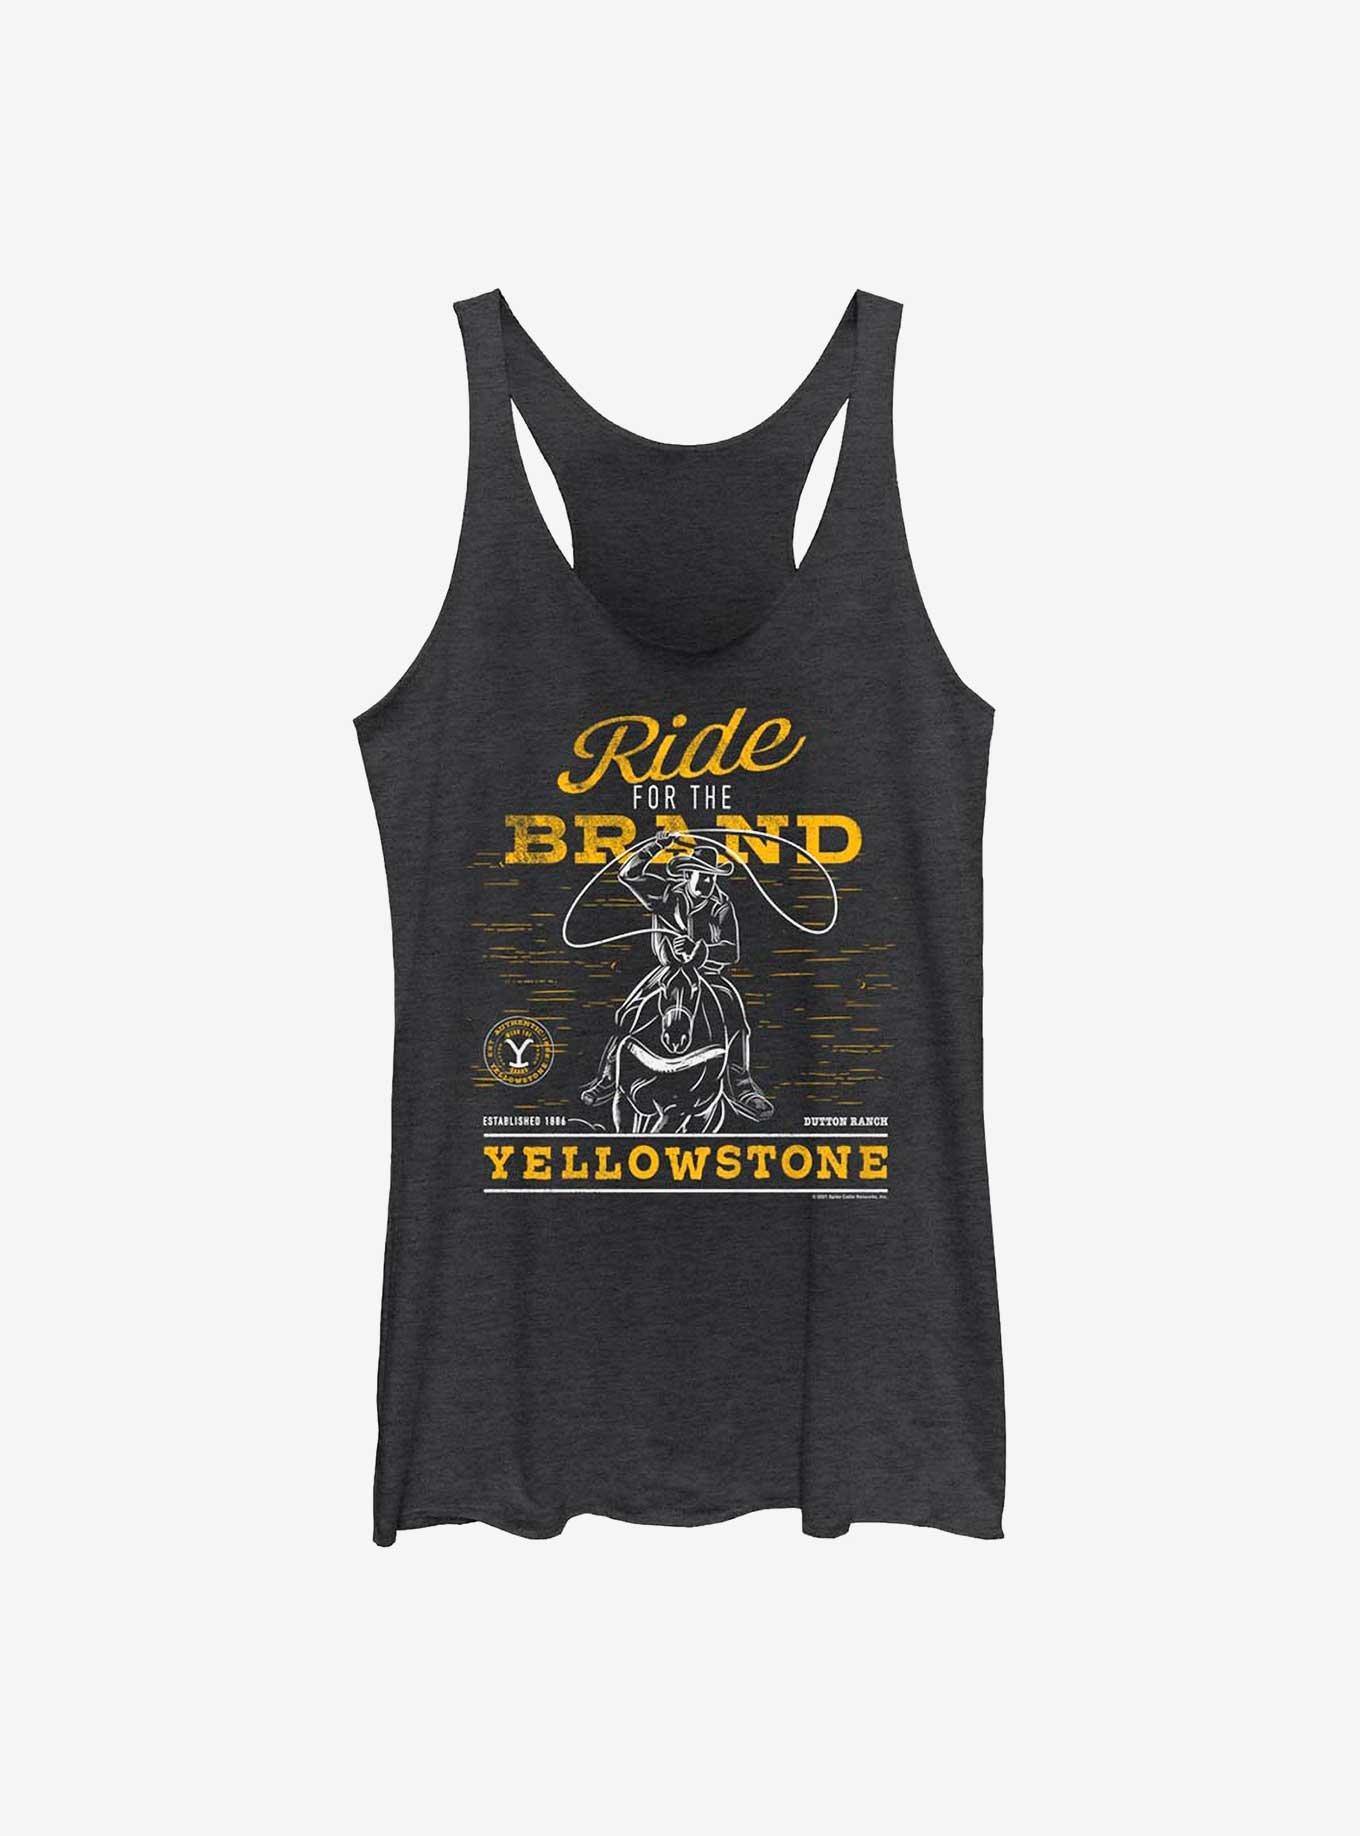 Yellowstone Ride For The Brand Girls Tank, BLK HTR, hi-res